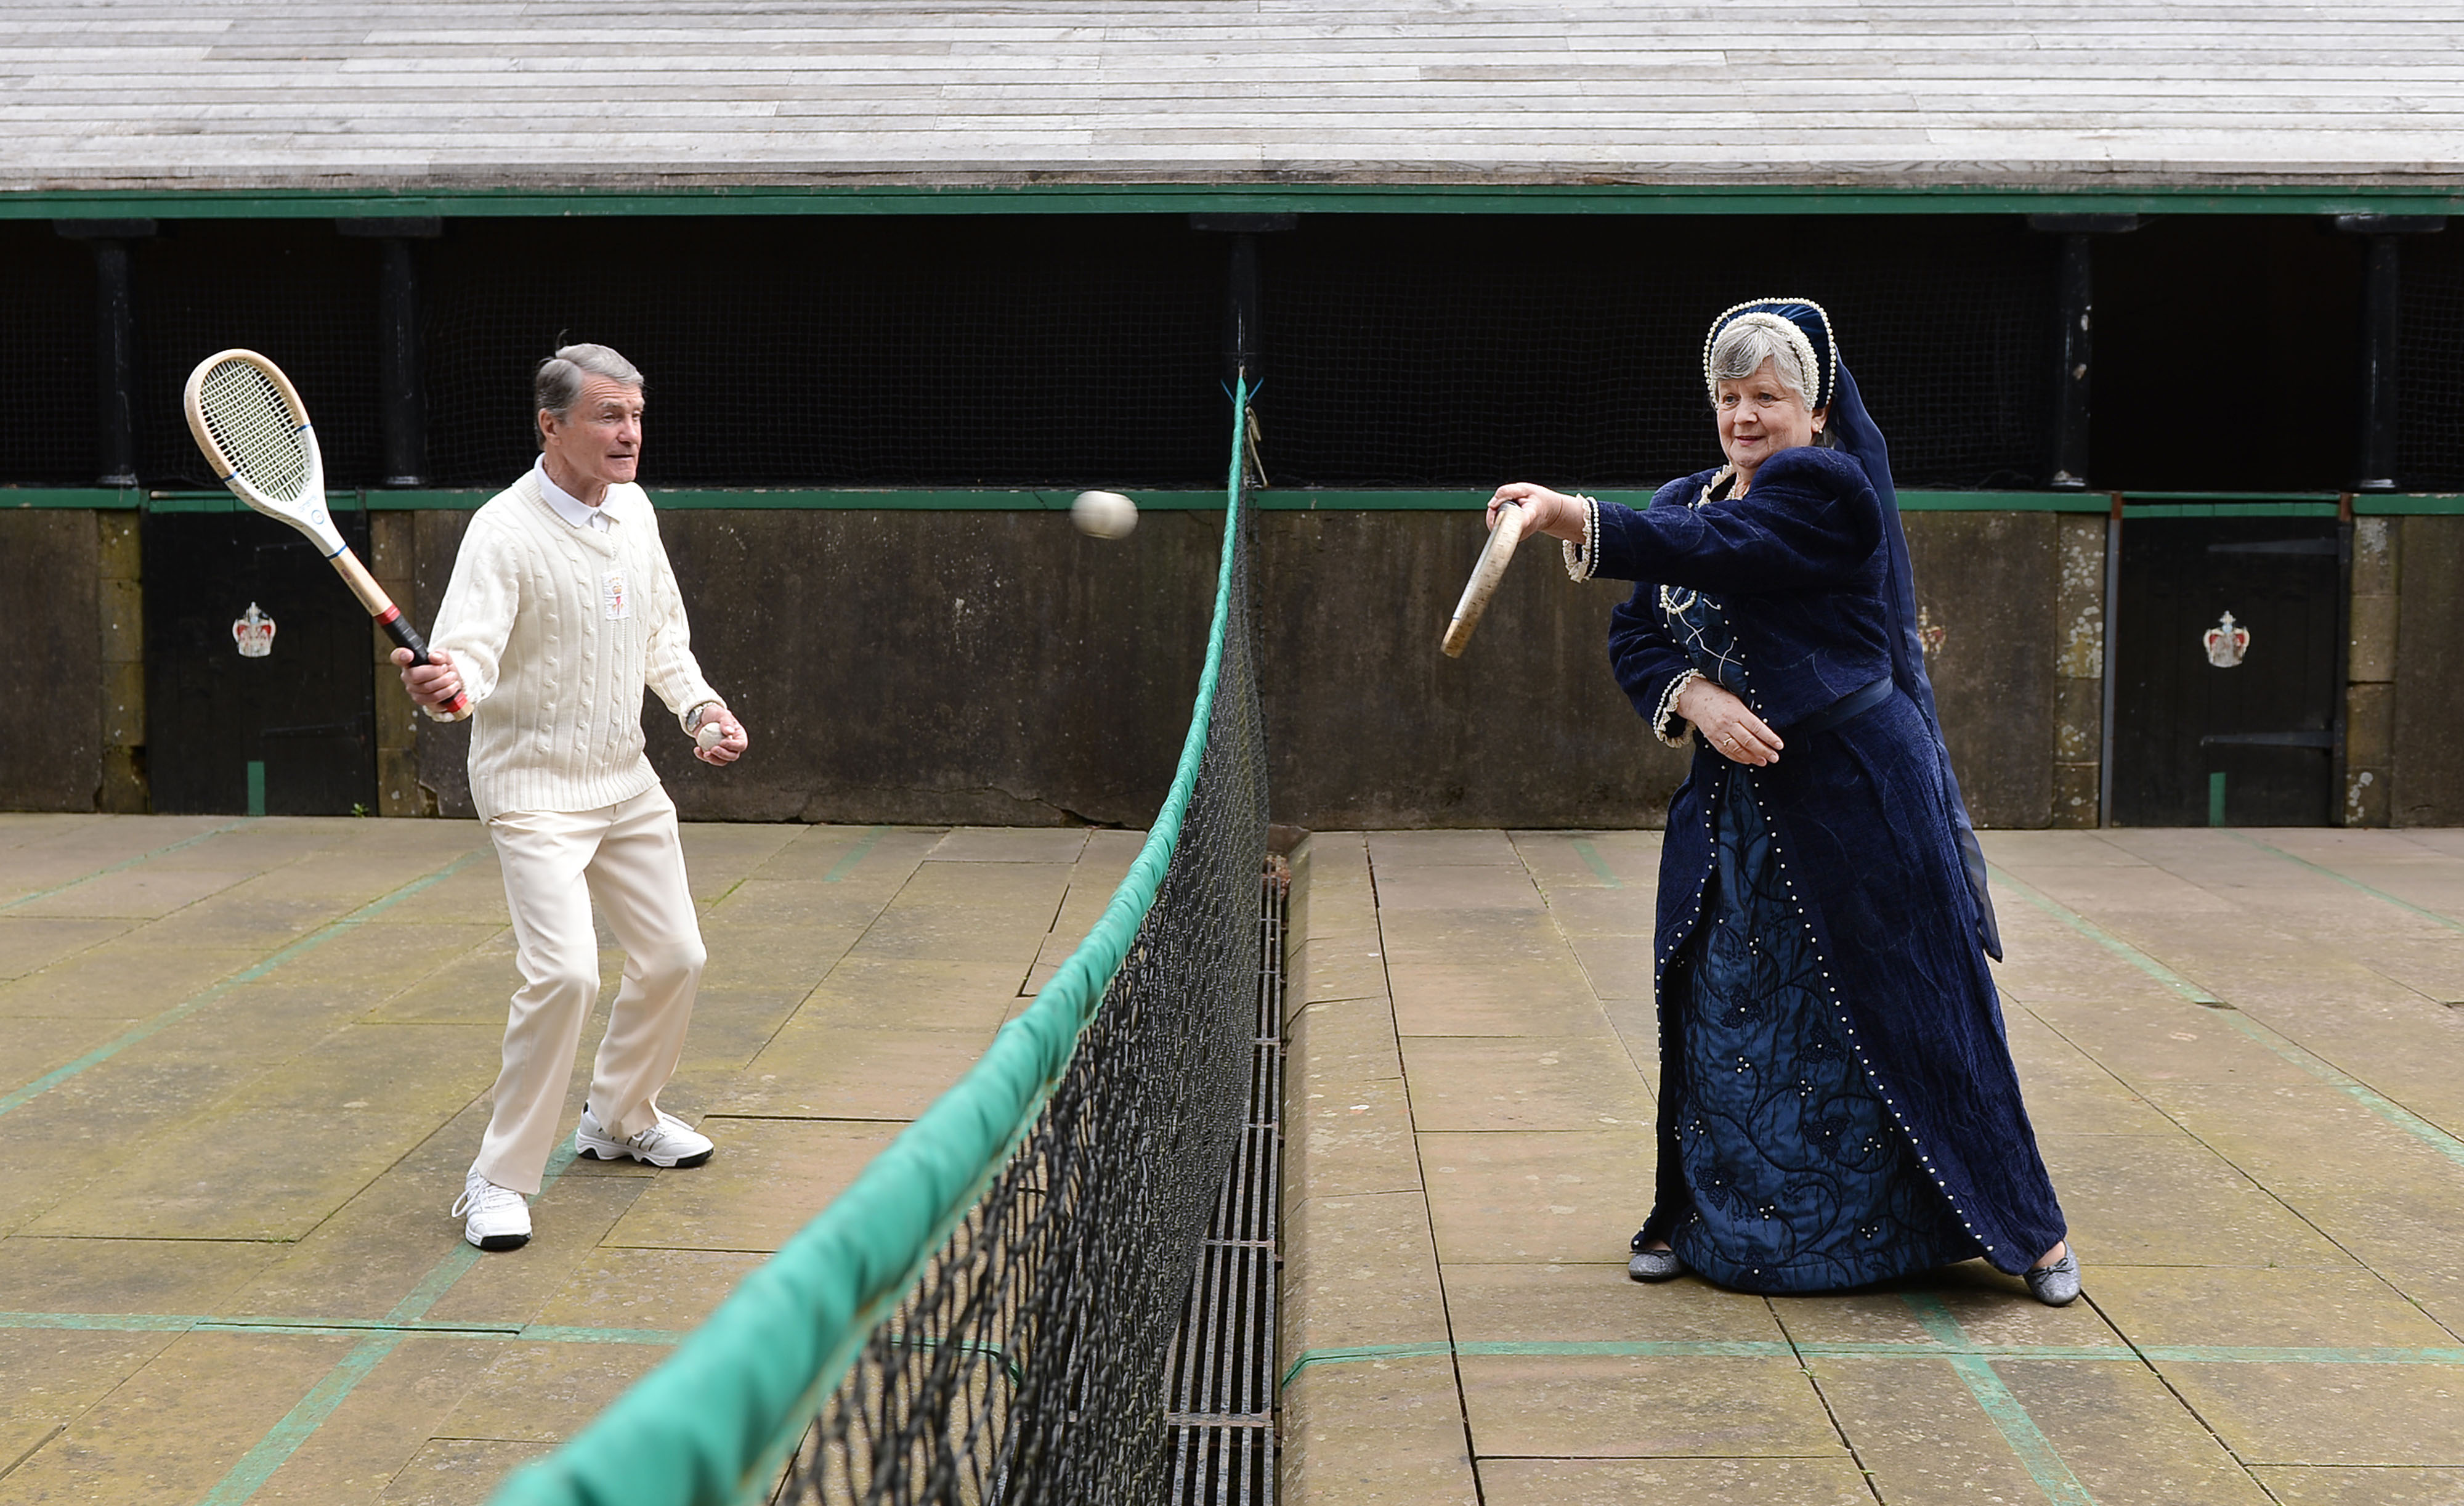 Two costumed characters playing tennis